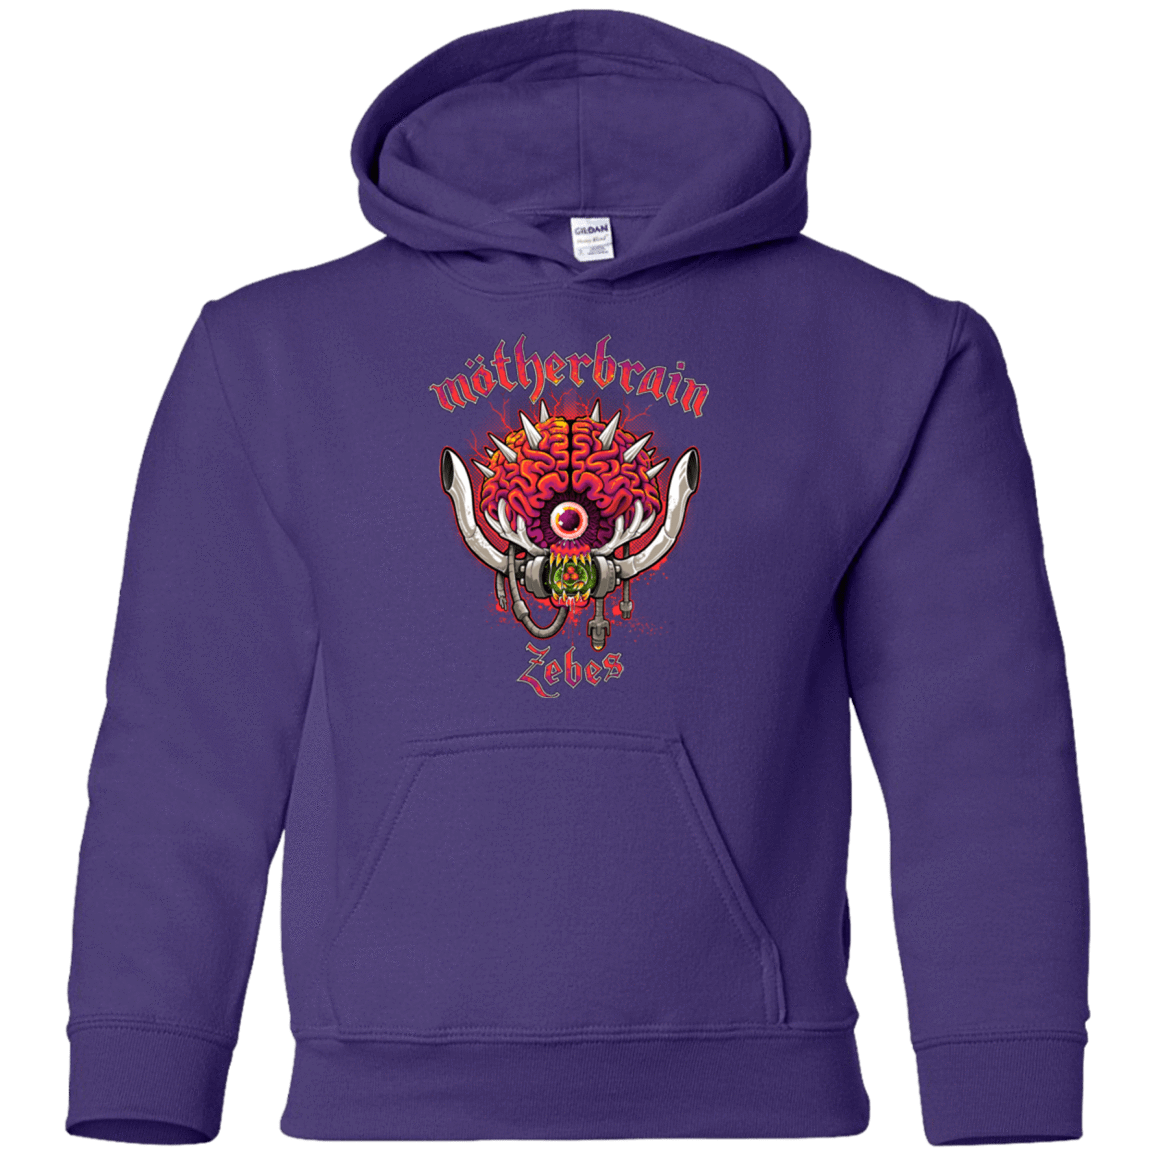 Sweatshirts Purple / YS Live From Zebes Youth Hoodie